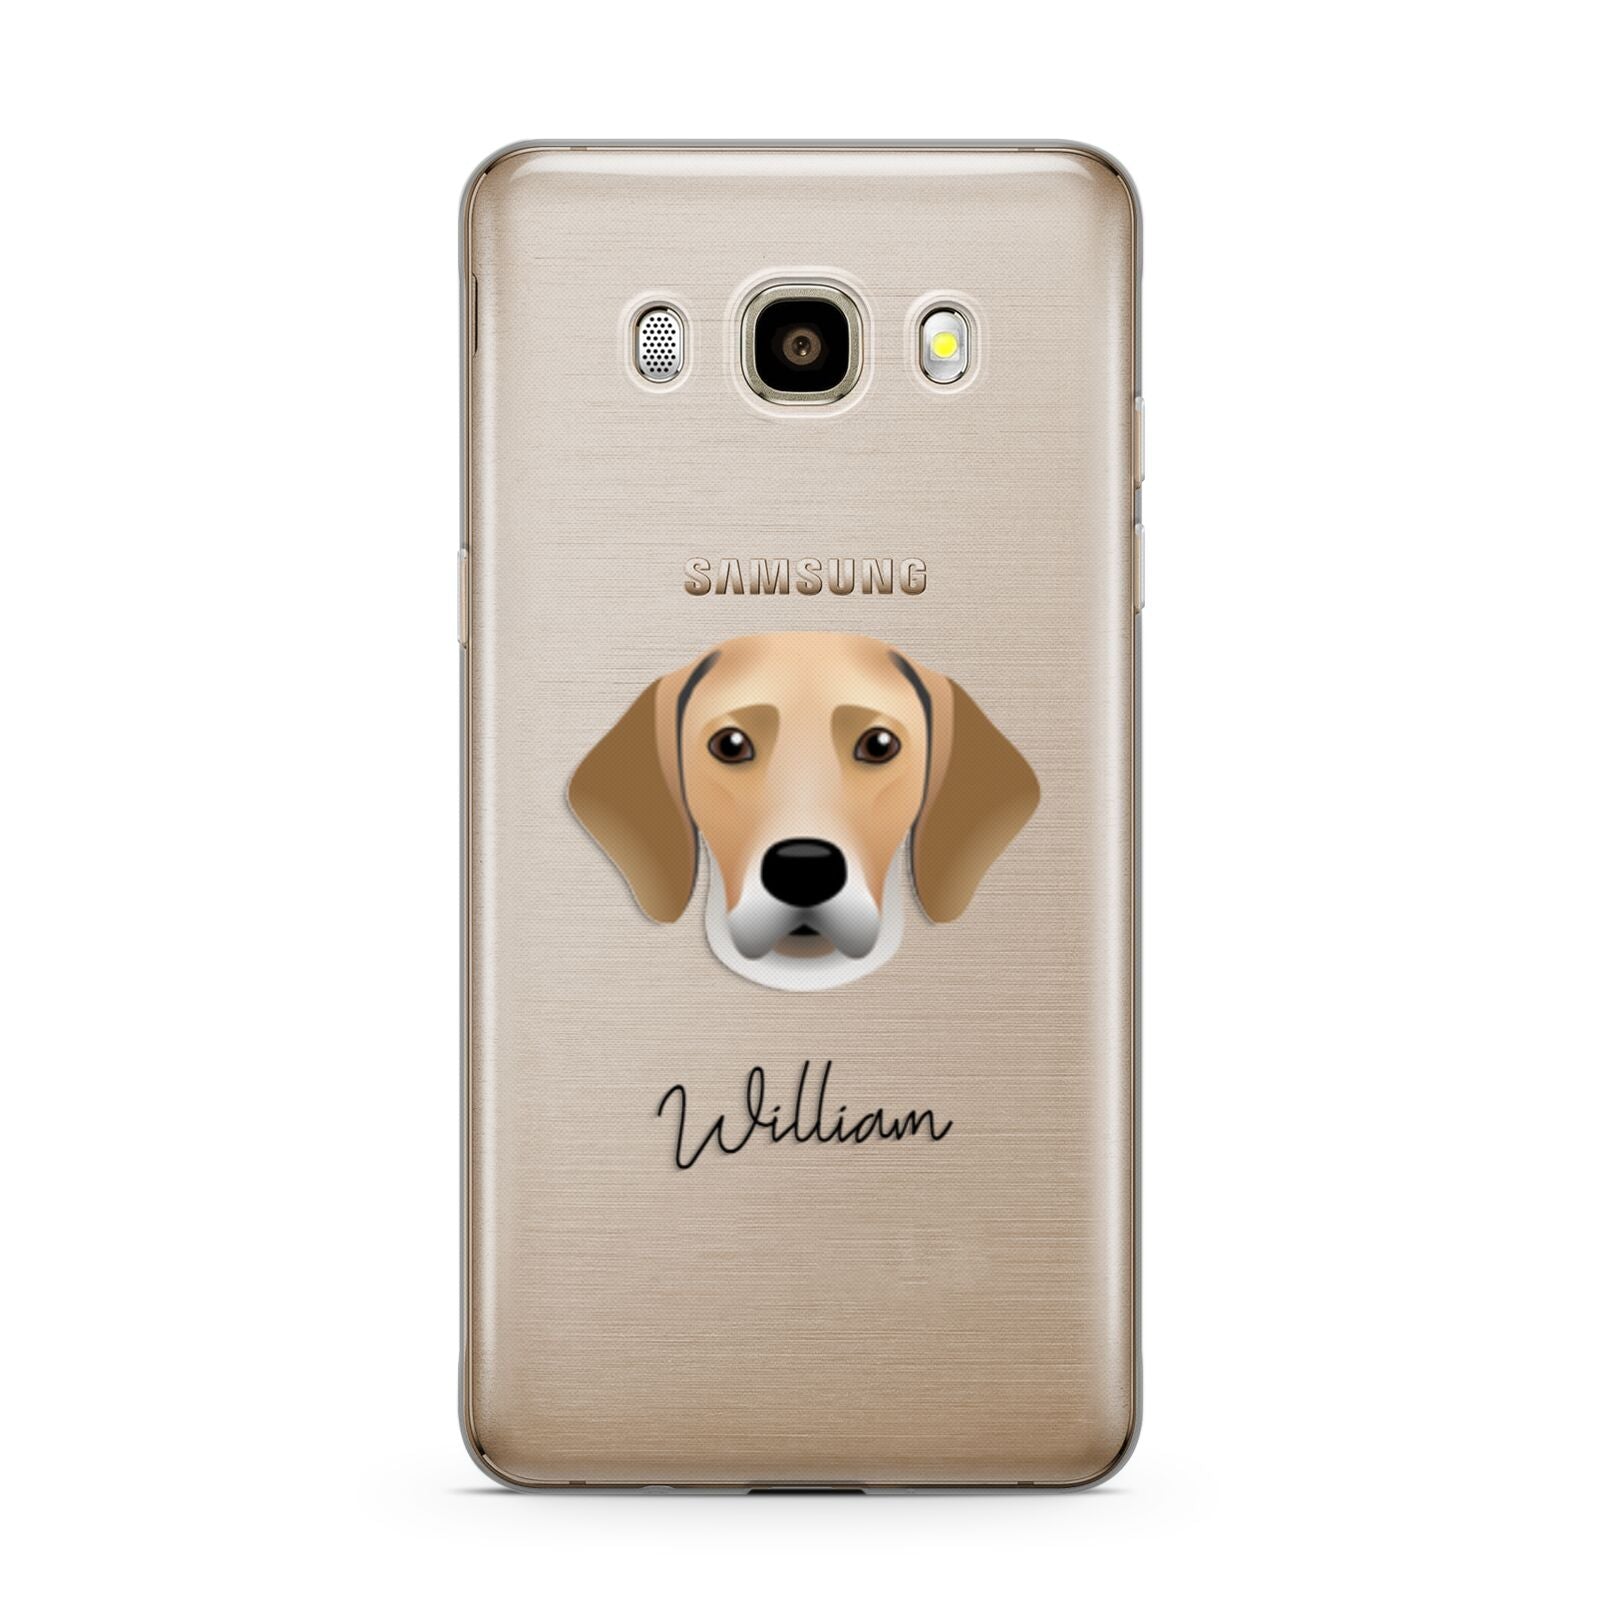 Harrier Personalised Samsung Galaxy J7 2016 Case on gold phone